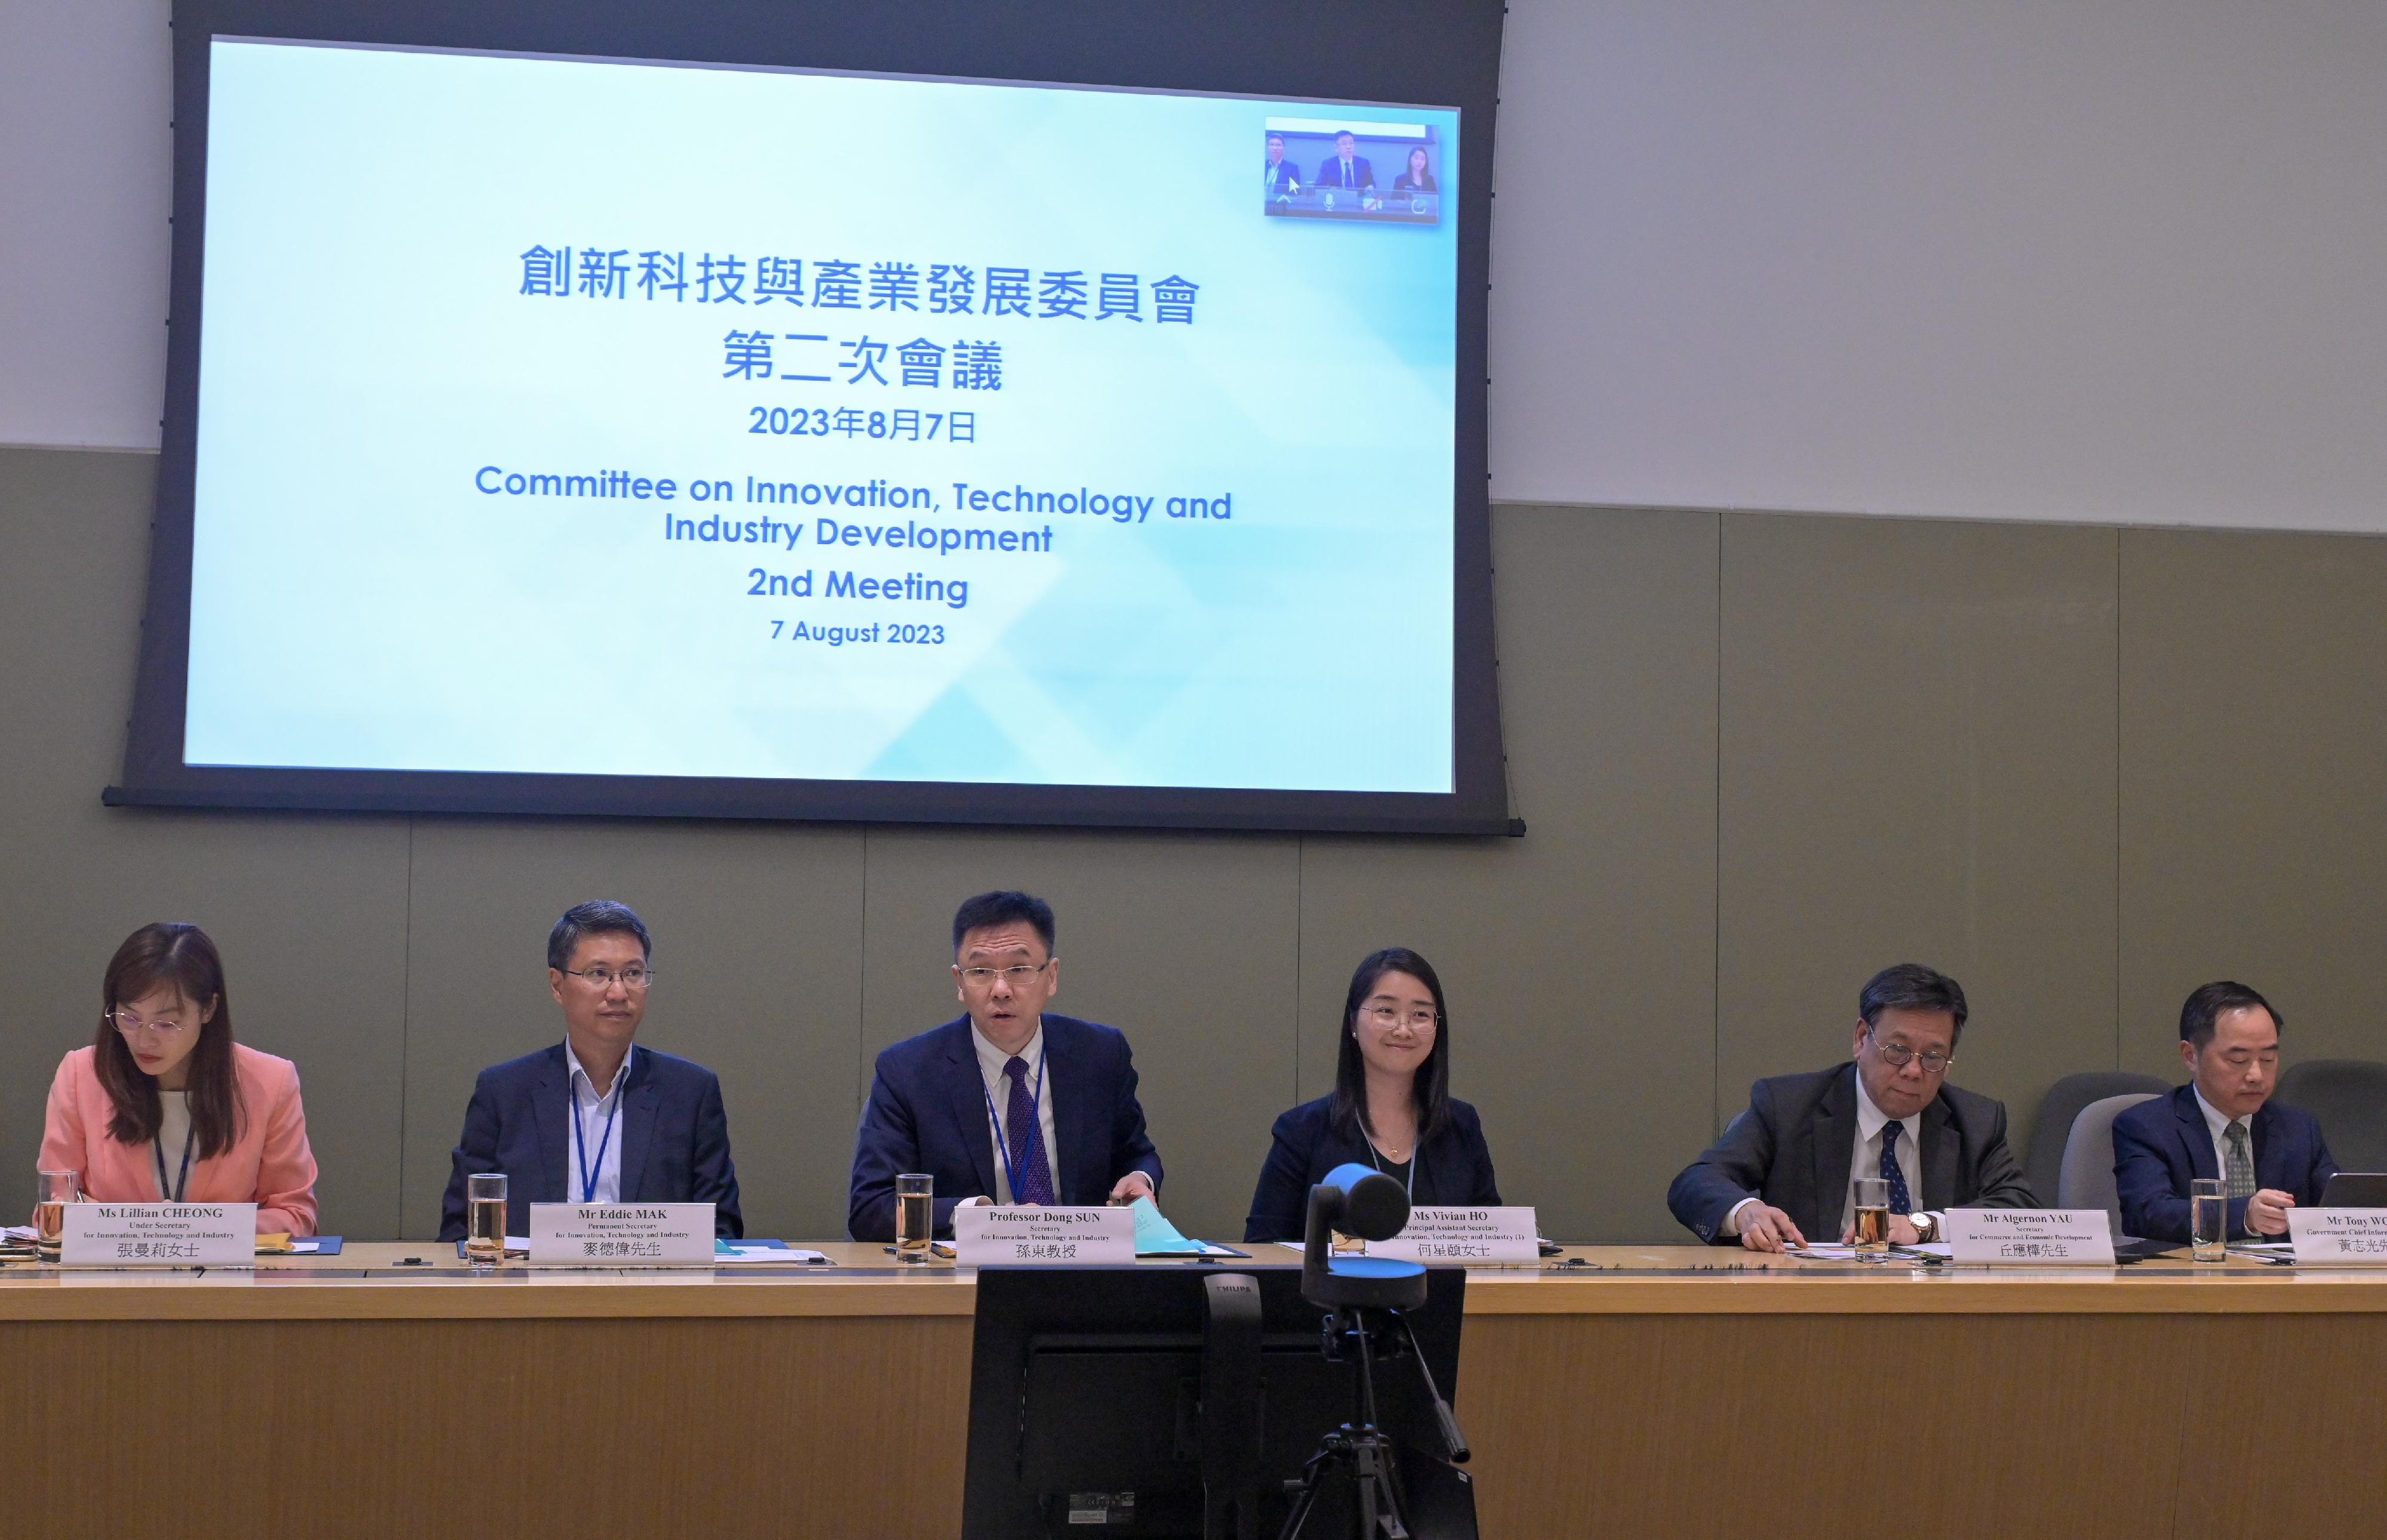 The Secretary for Innovation, Technology and Industry, Professor Sun Dong (third left), chaired the second meeting of the Committee on Innovation, Technology and Industry Development today (August 7). Also joining the meeting were the Secretary for Commerce and Economic Development, Mr Algernon Yau (second right); the Permanent Secretary for Innovation, Technology and Industry, Mr Eddie Mak (second left); the Under Secretary for Innovation, Technology and Industry, Ms Lillian Cheong (first left); and the Government Chief Information Officer, Mr Tony Wong (first right).